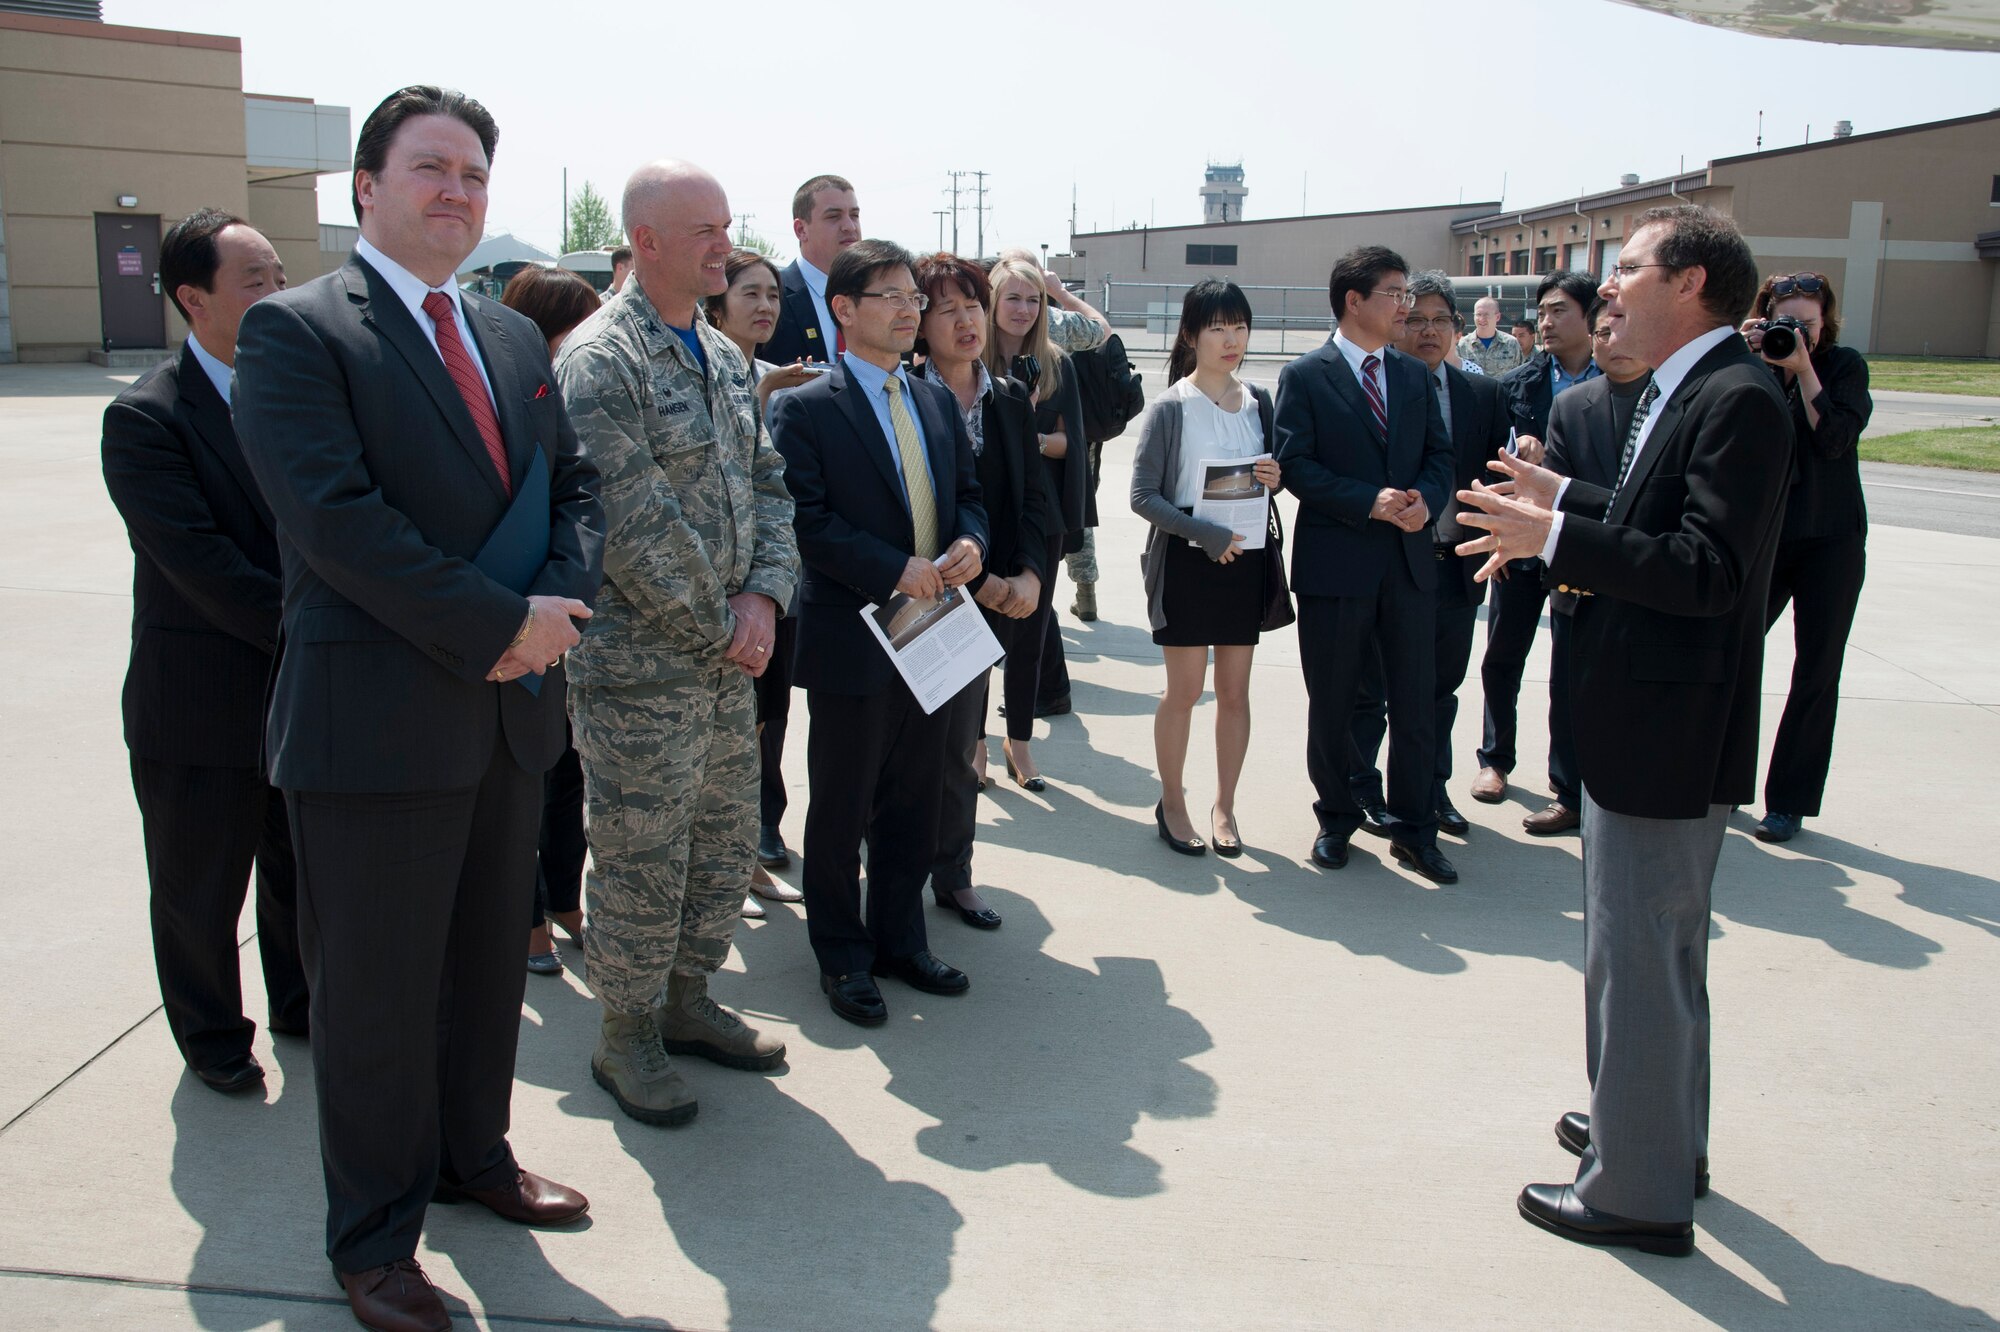 James Crawford, NASA lead U.S. scientist for Korea United States-Air Quality (KORUS-AQ) Experiment, gives an overview of the aircraft that will be participating in the KORUS-AQ to Marc Knapper, U.S. Embassy Seoul deputy chief of mission, and 51st Fighter Wing Commander, Col. Andrew Hansen, at Osan Air Base, Republic of Korea, April 29, 2016. KORUS-AQ is a joint field study by NASA and the National Institute of Environmental Research that will advance the ability to monitor air pollution more accurately from space. (U.S. Air Force photo by Staff Sgt. Jonathan Steffen/Released